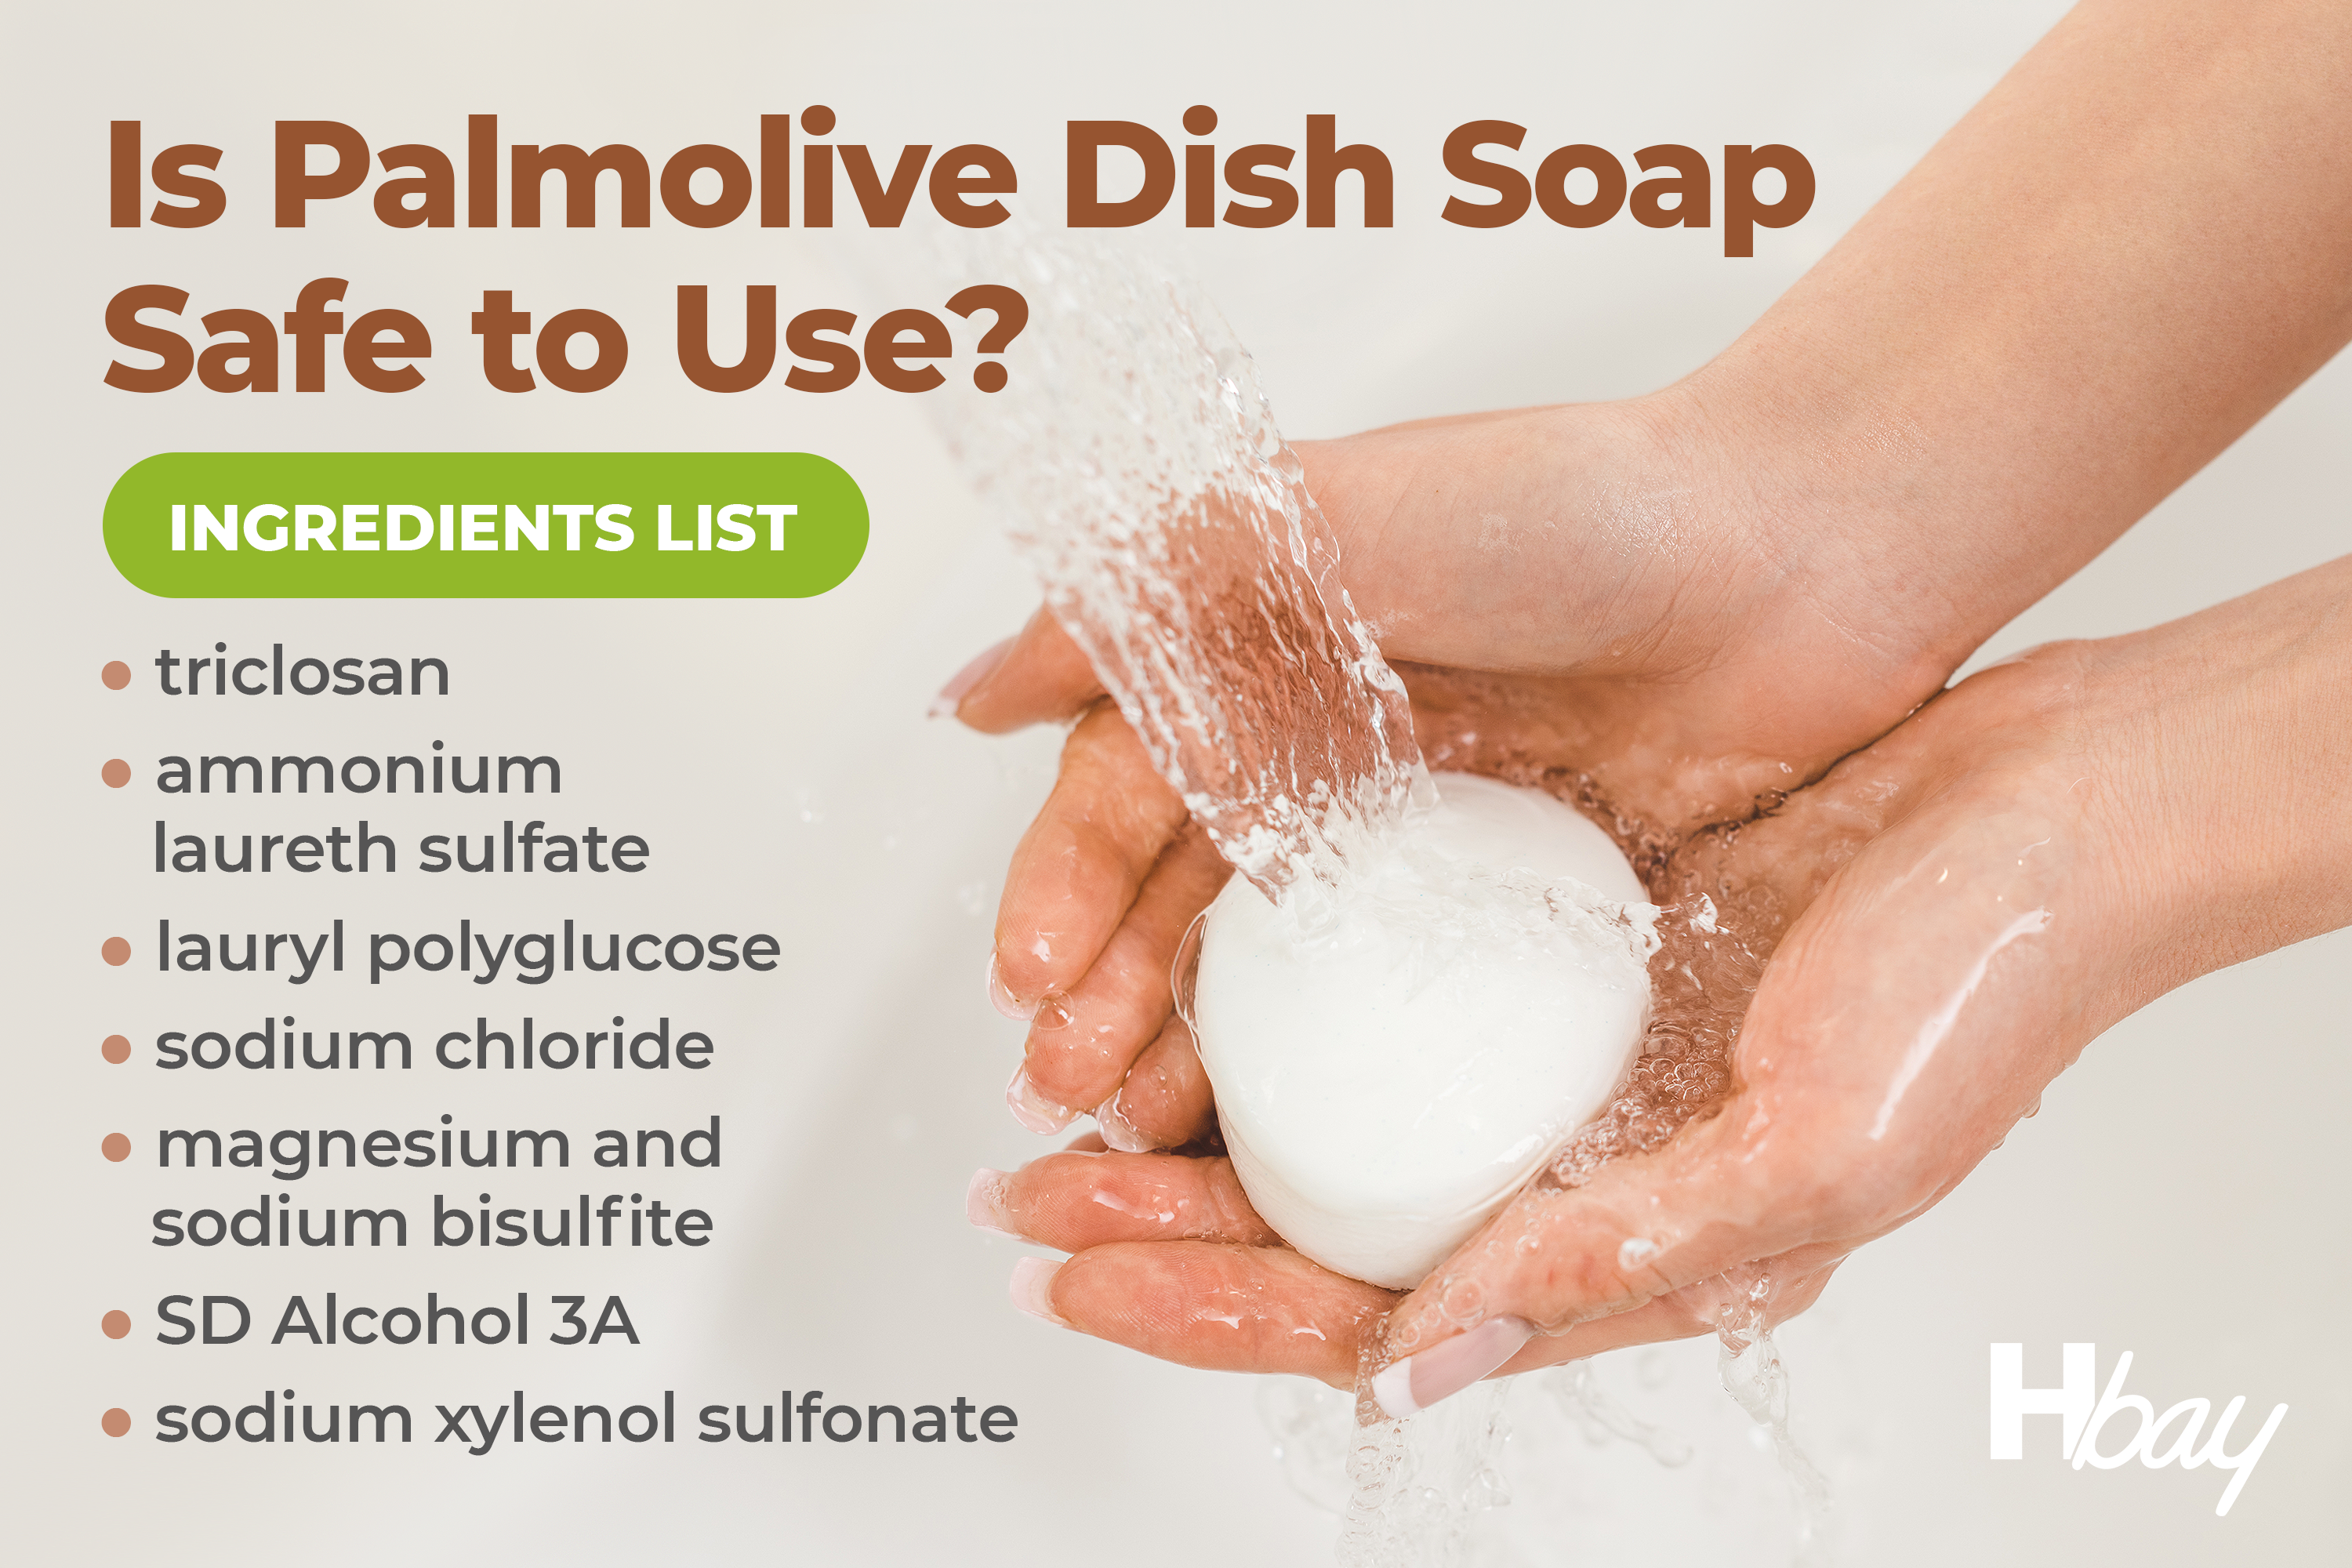 Is Palmolive Dish Soap Safe to Use